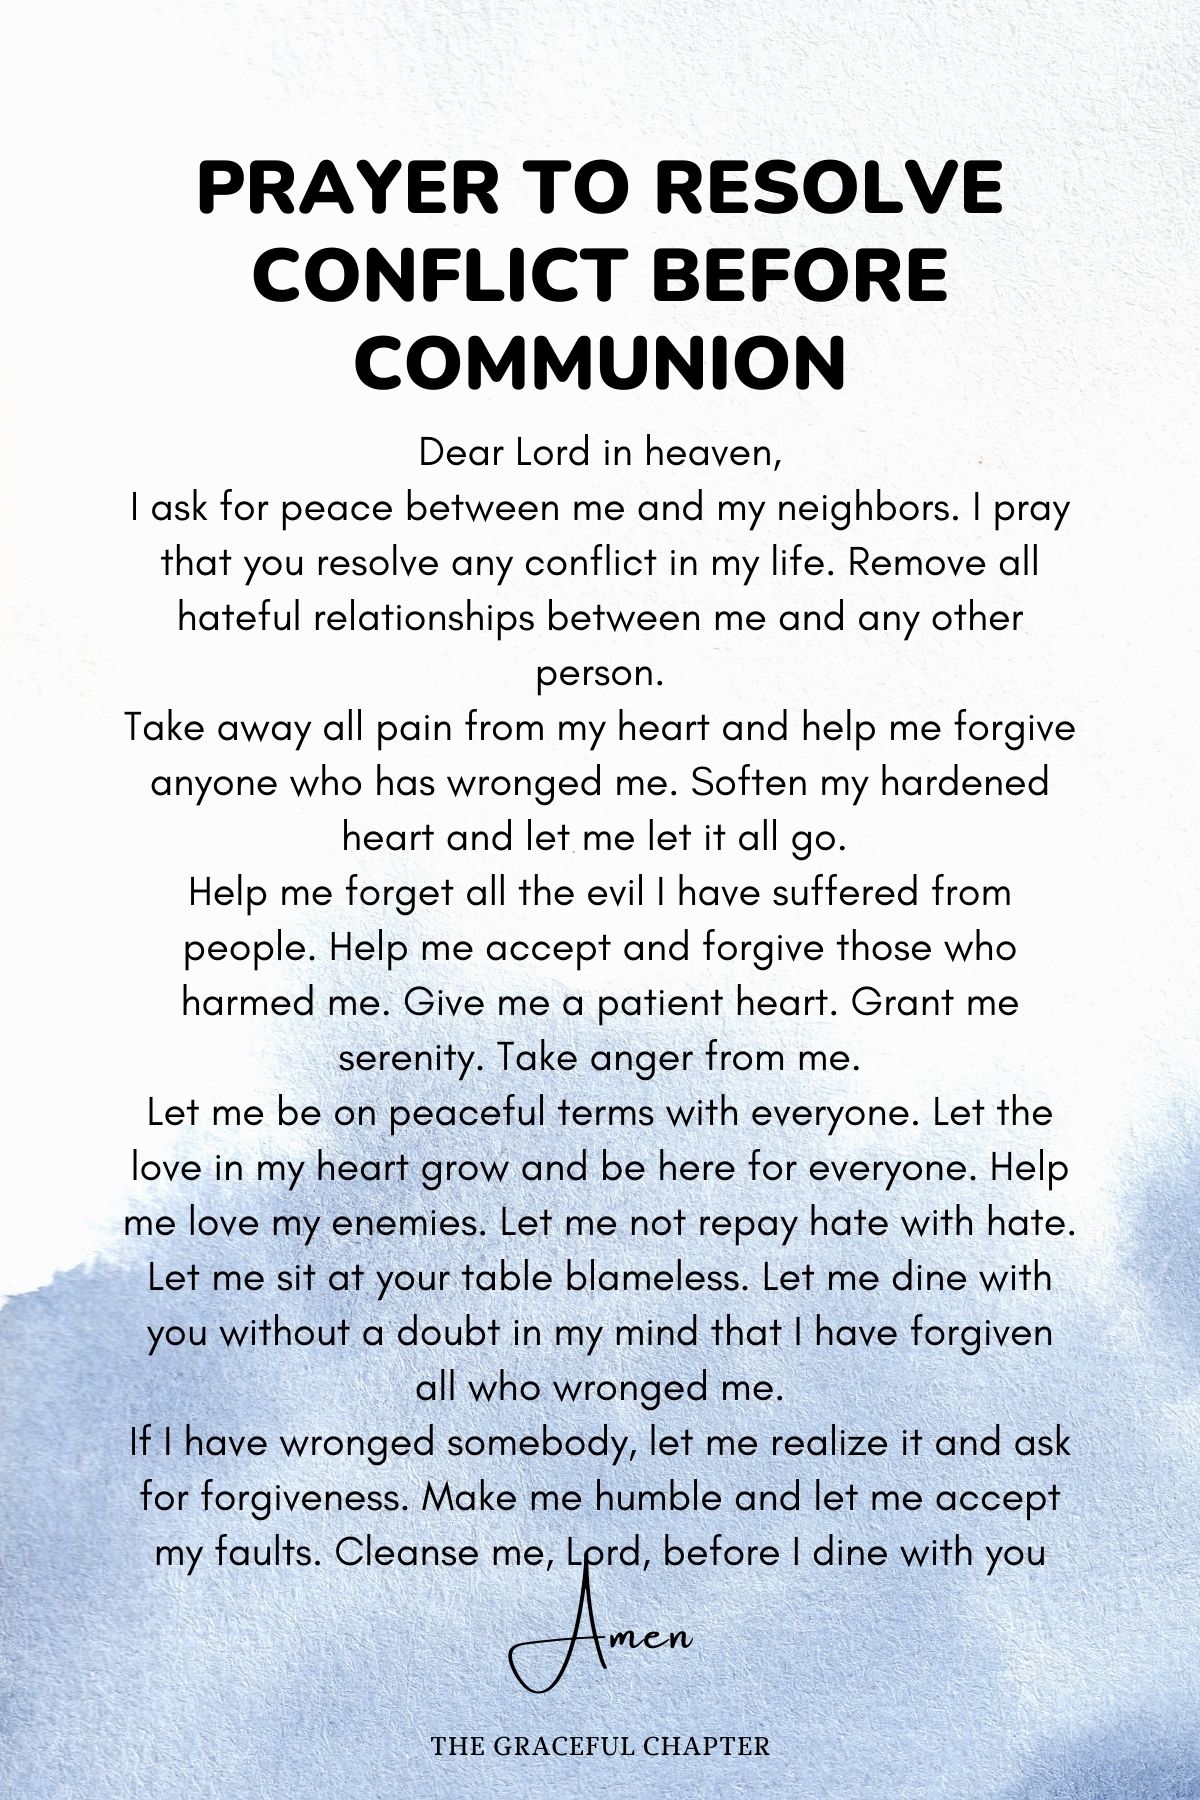 Prayer to resolve conflict before communion